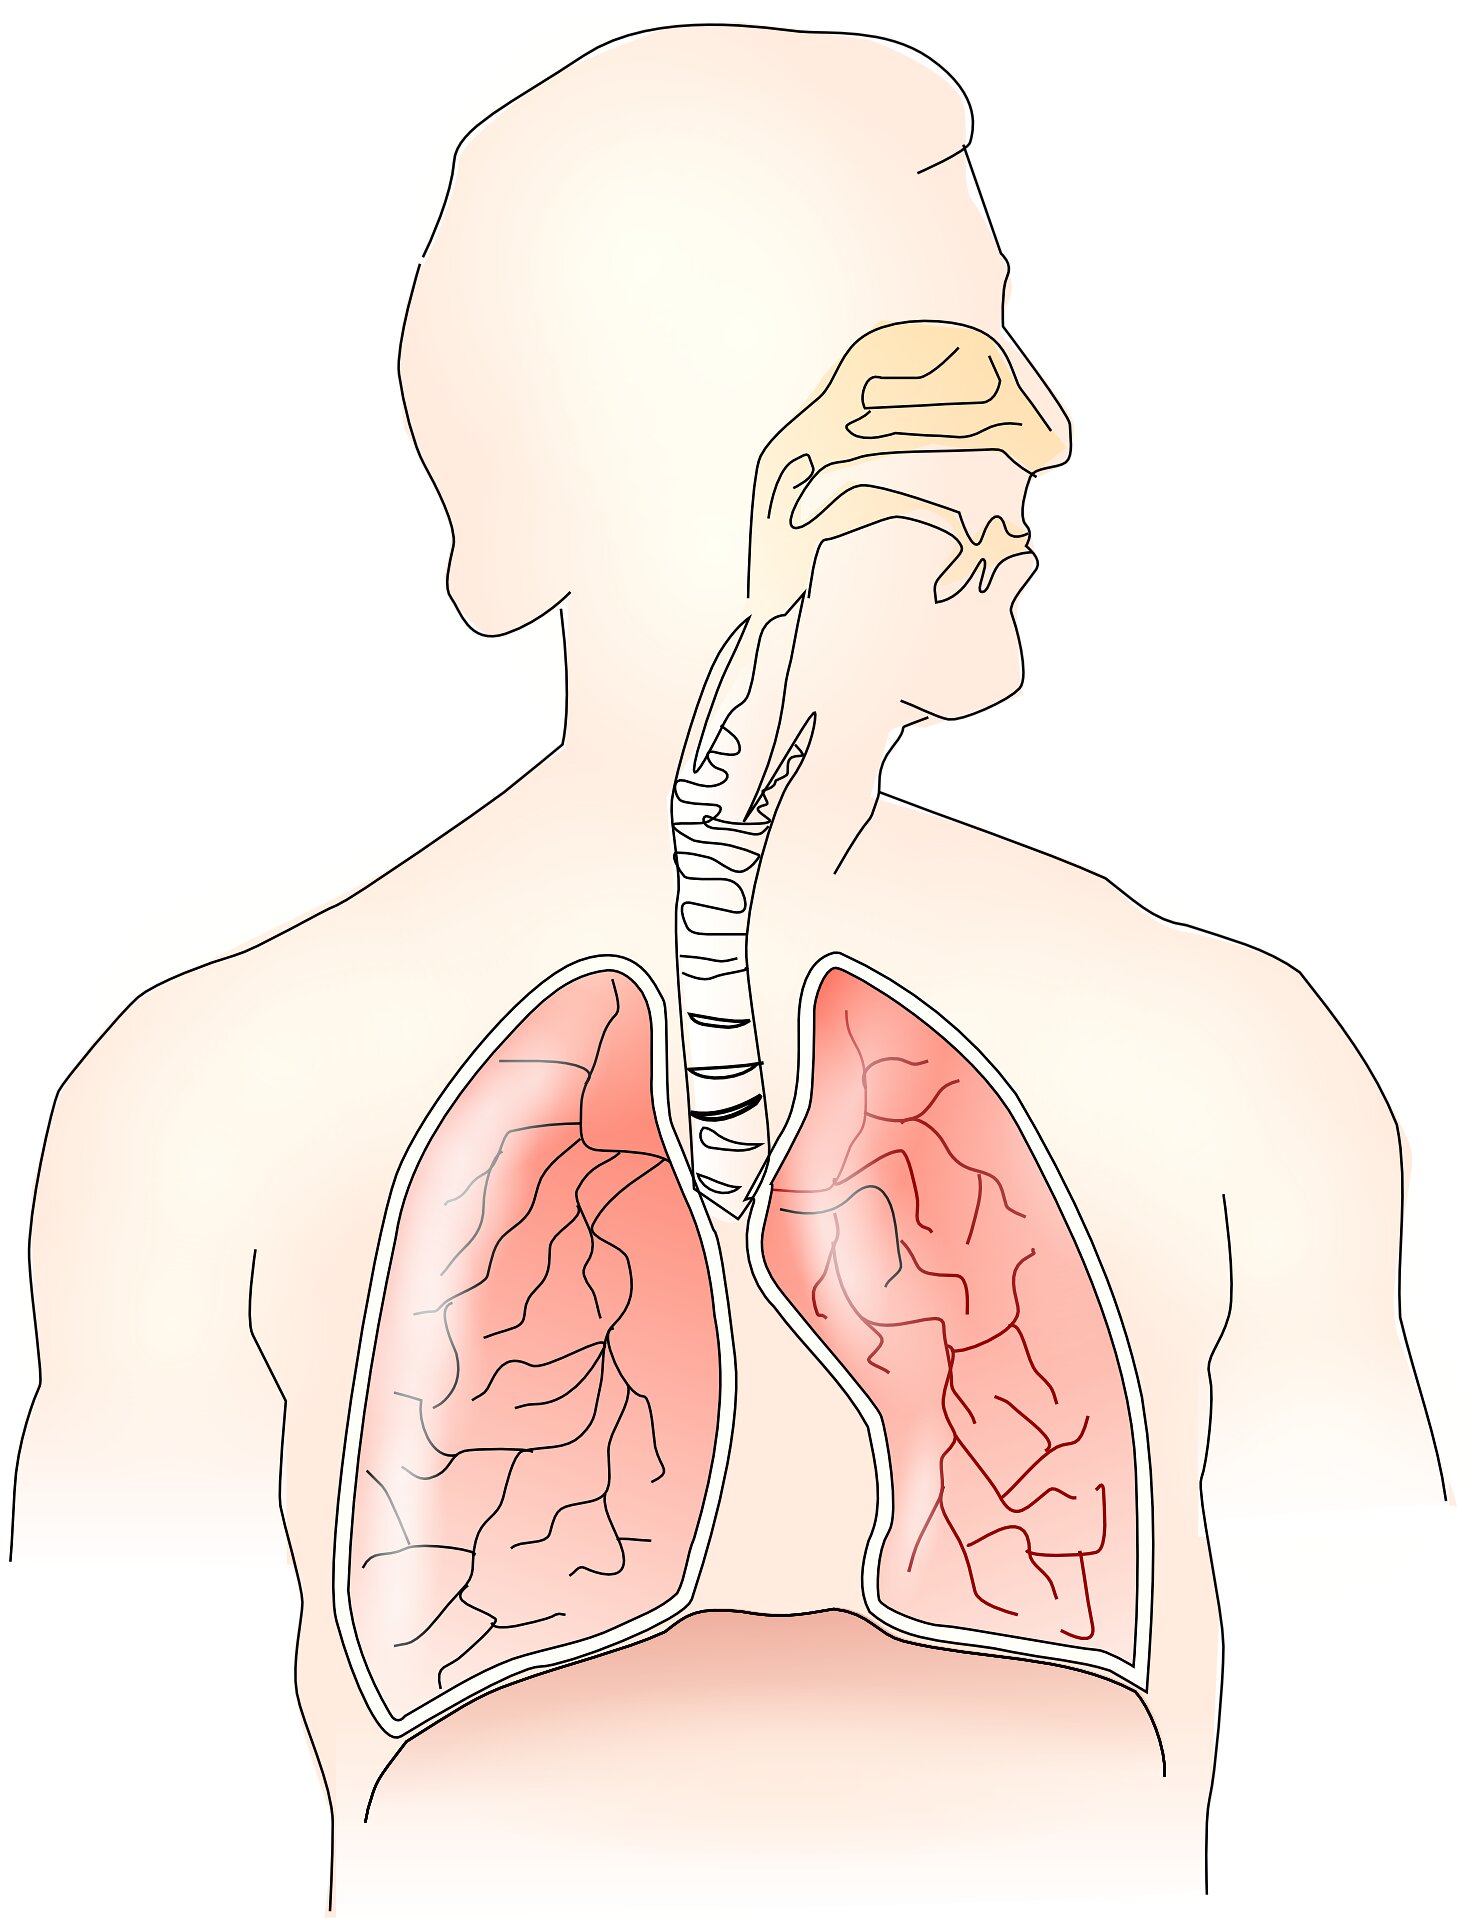 Exhaled breath analysis shows promise in detecting malignant pleural mesothelioma